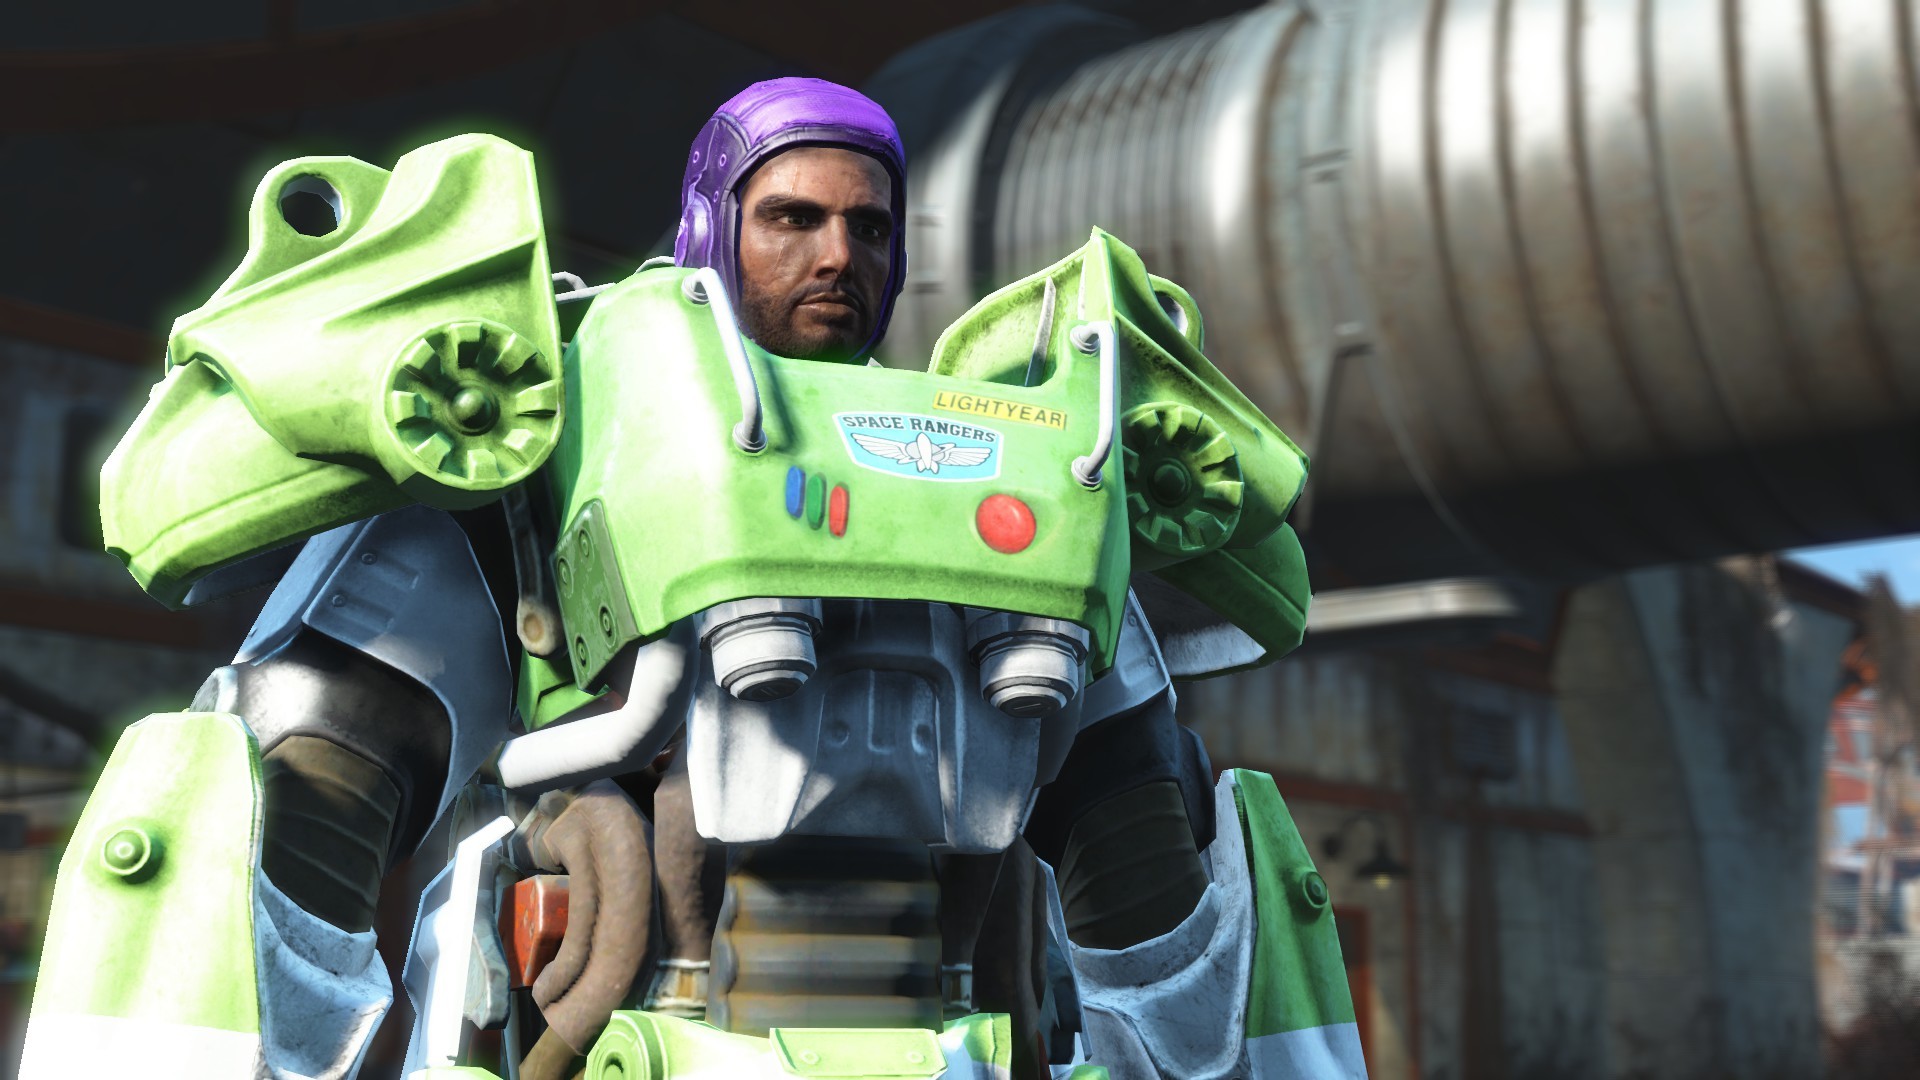 1920x1080 Go to The Institute and beyond with this Fallout 4 Buzz Lightyear armor mod  | PC Gamer